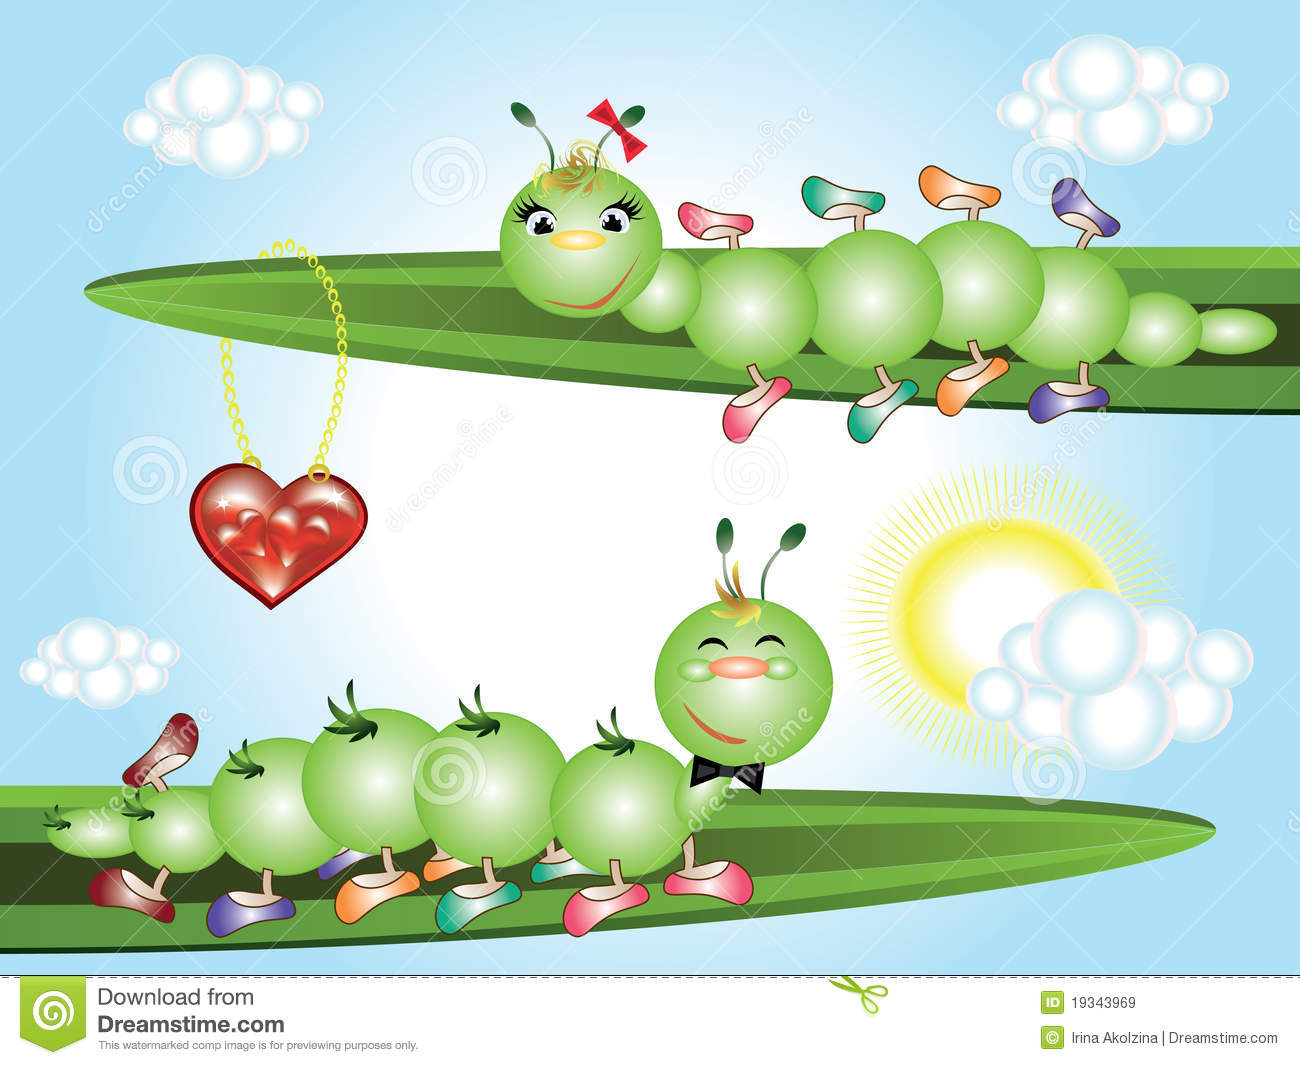 Caterpillars In Love Royalty Free Stock Images   Image  19343969